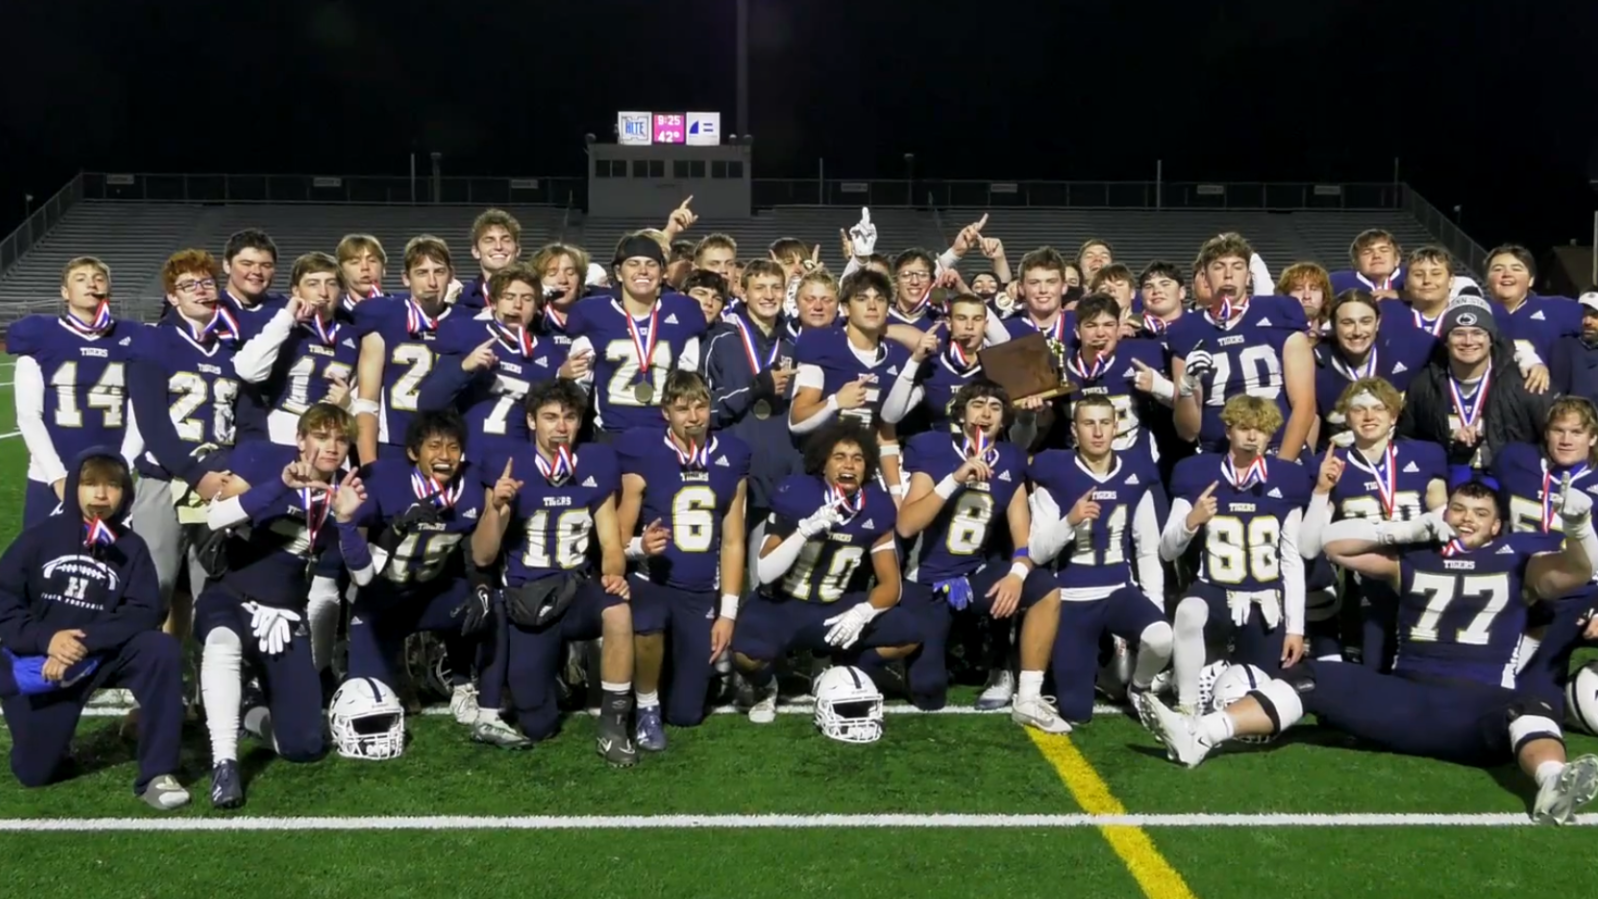 D6 Class 5-A Football Champions - Content Image for hollidaysburgareashs_bigteams_26317